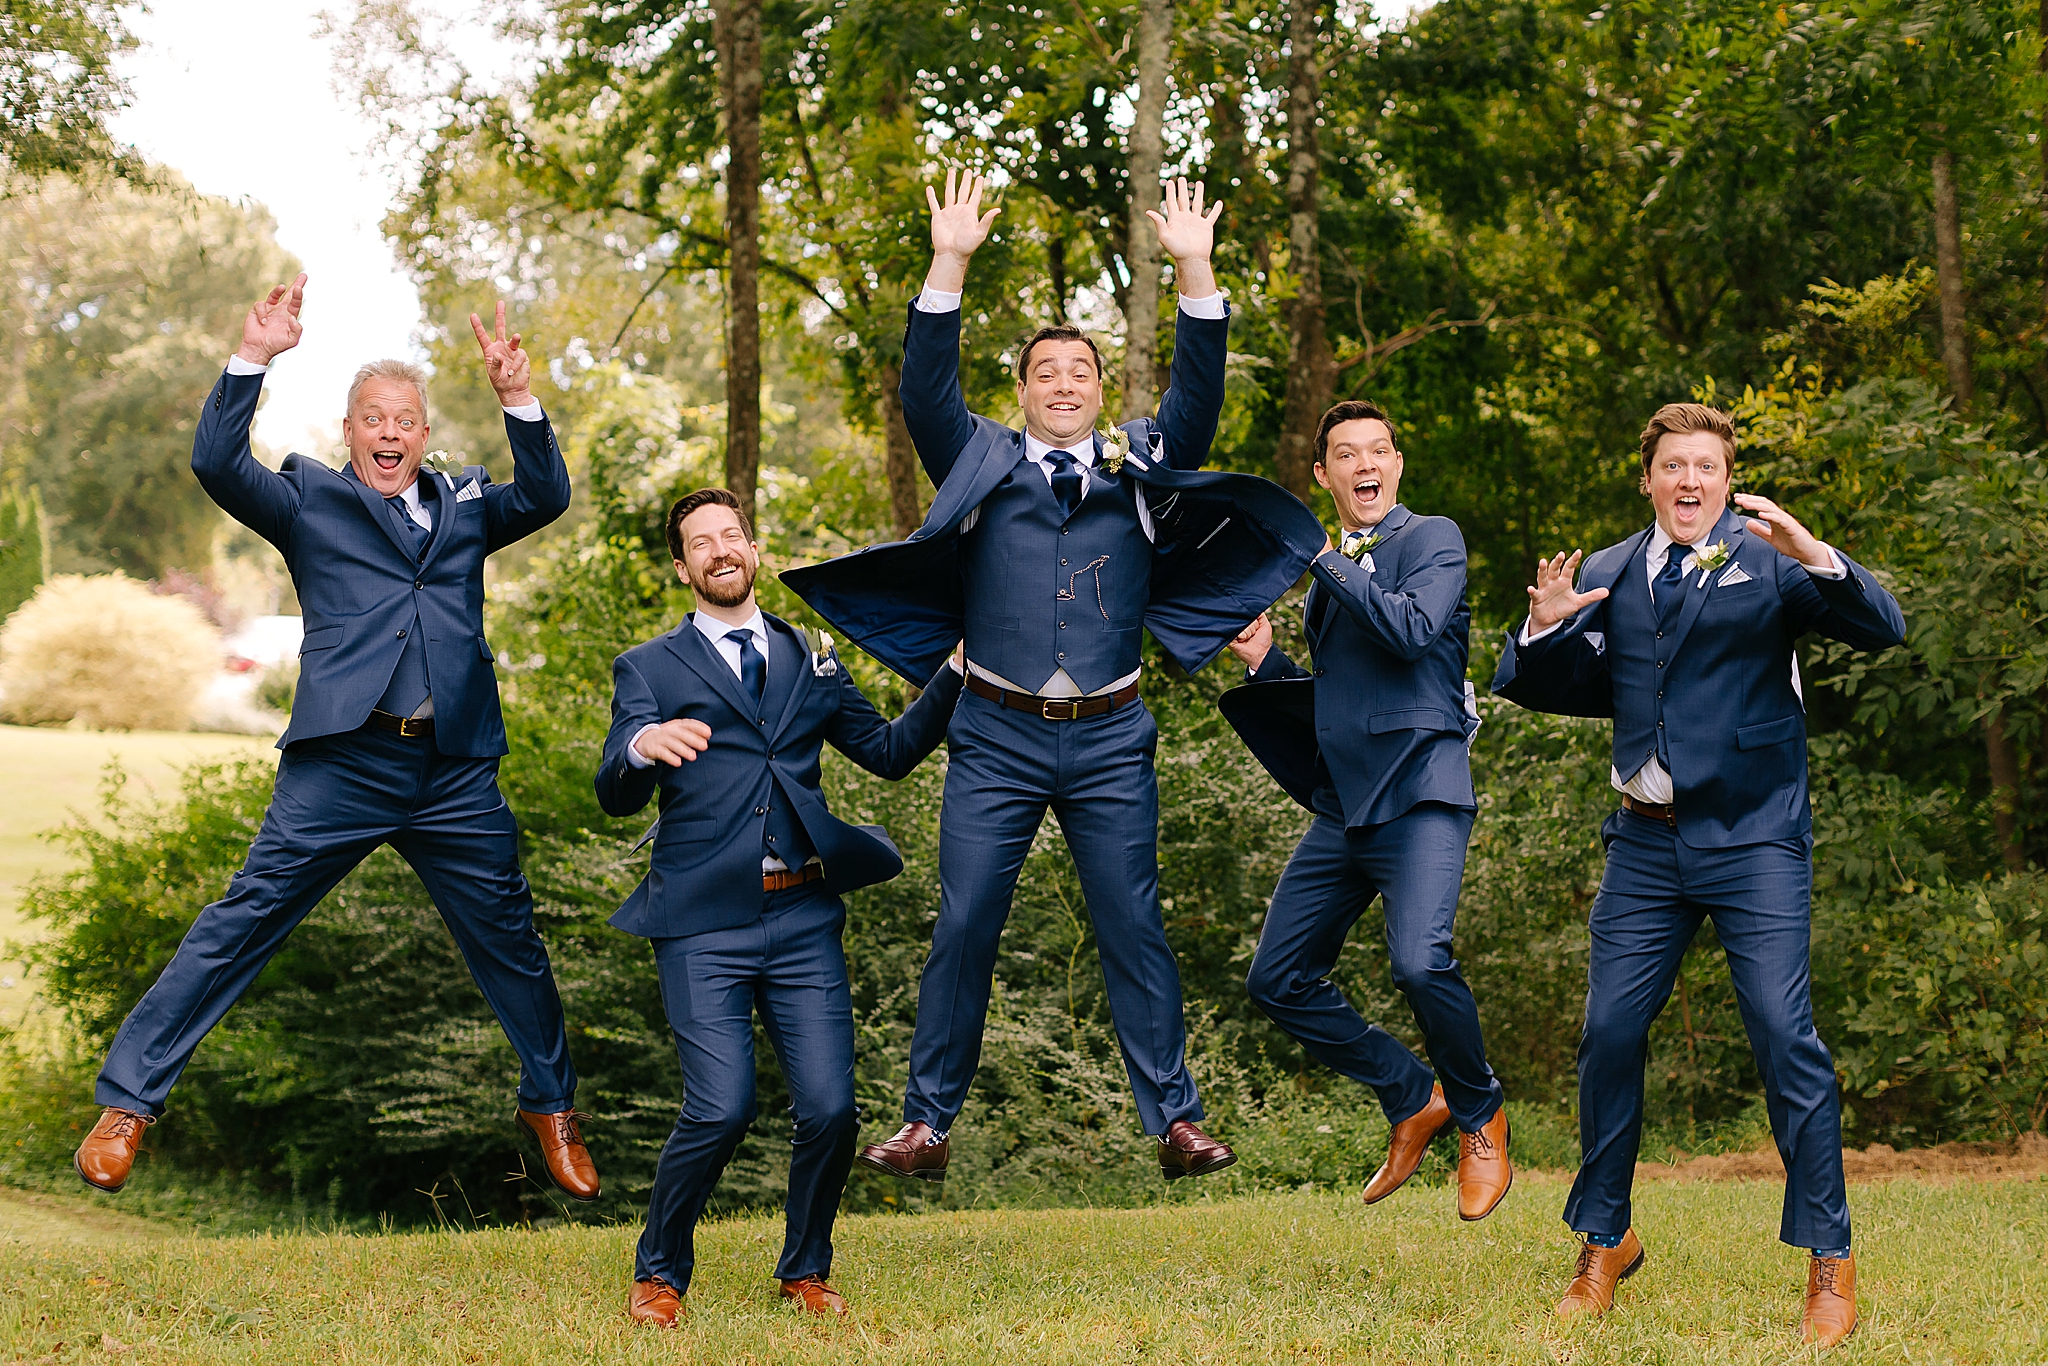 groomsmen jump during wedding party portraits at Camellia Gardens